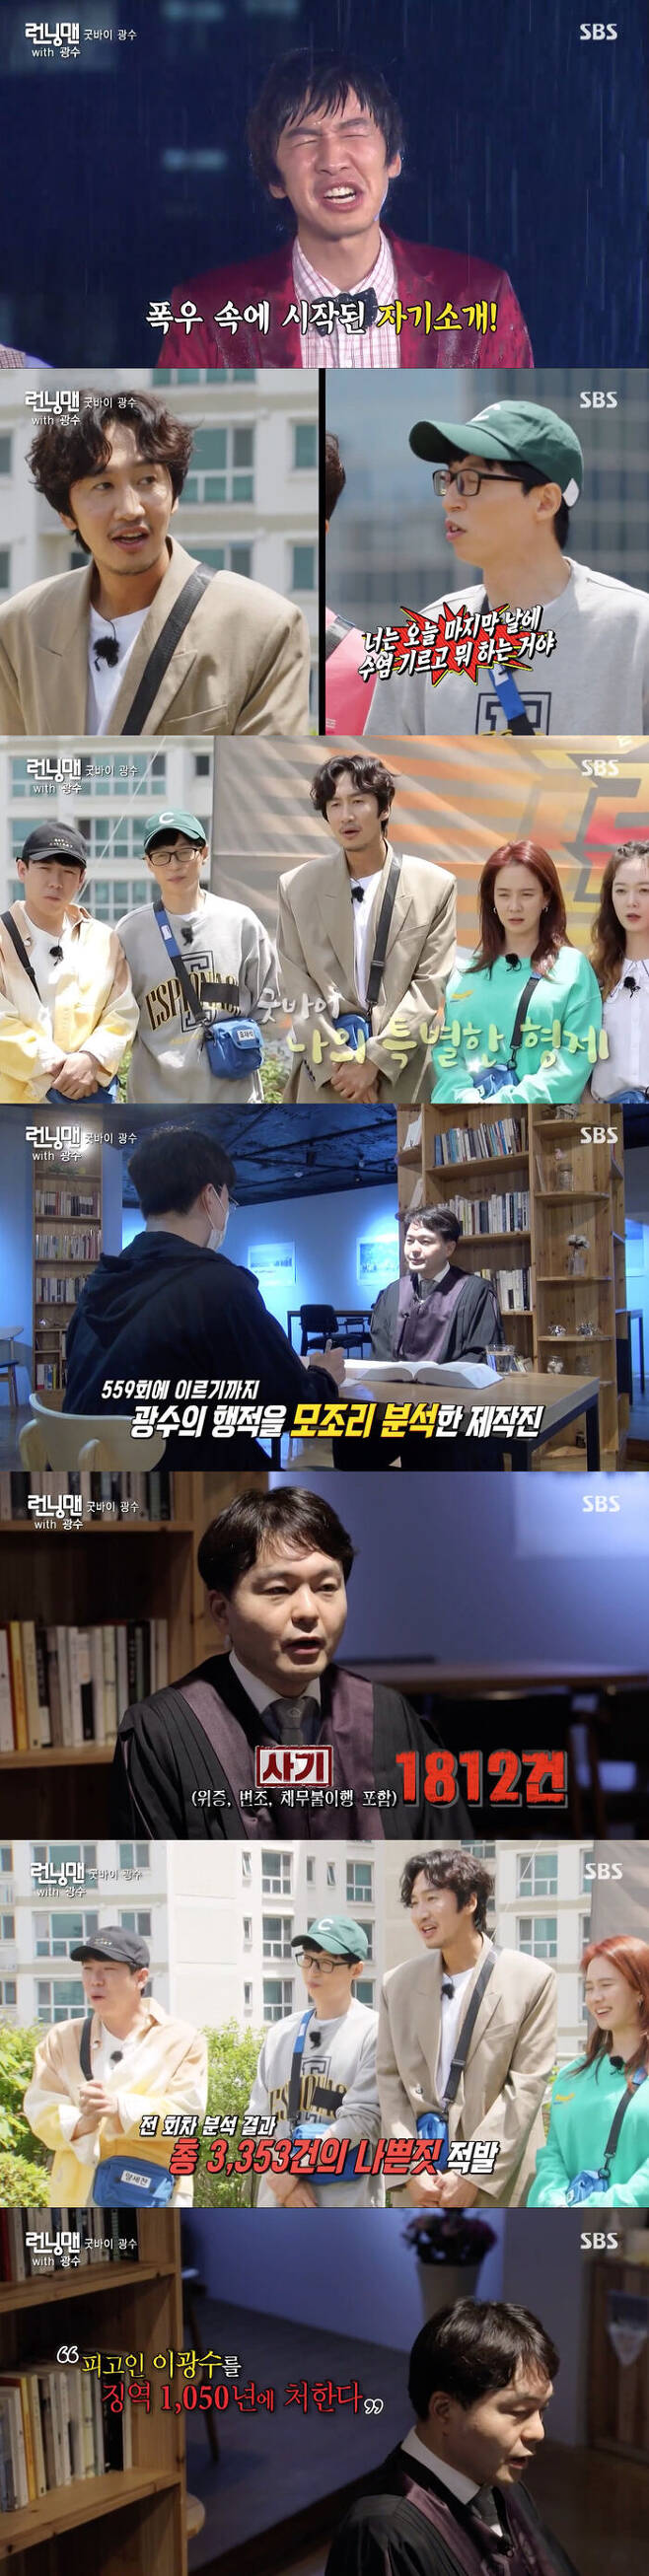 What was Sins sentence, which was committed by Kwangsoo during 559 episodes?On SBS Running Man broadcasted on the 13th, Running Man was shown to Lee Kwang-soo.The opening of the show was held at the place where the first opening was filmed as Kwangsoo hoped, and the members recalled their first meeting with Kwangsoo.But at this time, Yoo Jae-Suk, who was looking at this Kwangsoo, said, Ya, you have a beard on the last day and what are you doing?Yang Se-chan said, I have to come clean. Oh, its a connection. I had a beard in the first inning.On this day, production team explained the race with Kwangsoo.Production team said, I will proceed with the Goodbye My Special Brother Race, which should be sent to the society after finishing the Running Man life in 11 years, and the Kwangsoo who has done many Sin and actions.And the production team added, We analyzed the behavior of Kwangsoo accumulated over 11 years and judged how much the sentence is, and it was examined by a former judge and current judge.In the 559th period, Kwangsoo has committed a total of 3353 sins, including 58 property damage, 353 assaults, 37 performance pornography, 1812 frauds including fraud, perjury, and default.Production team asked, If you look at entertainment, you should judge how many years would be appropriate if you imposed a sentence on this Ongat Sin. The judge, a judge, surprised everyone by saying, Considering the Sinzil, the degree of illegality, and the number of times, the defendant is sentenced to 1050 years in prison.Then, production team said, In order to get out of Sinsu Kwangsoo, we must reduce all social adaptation training and edification missions and end the mission.If you do not succeed in the reduction, you will be punished by one penalty. 